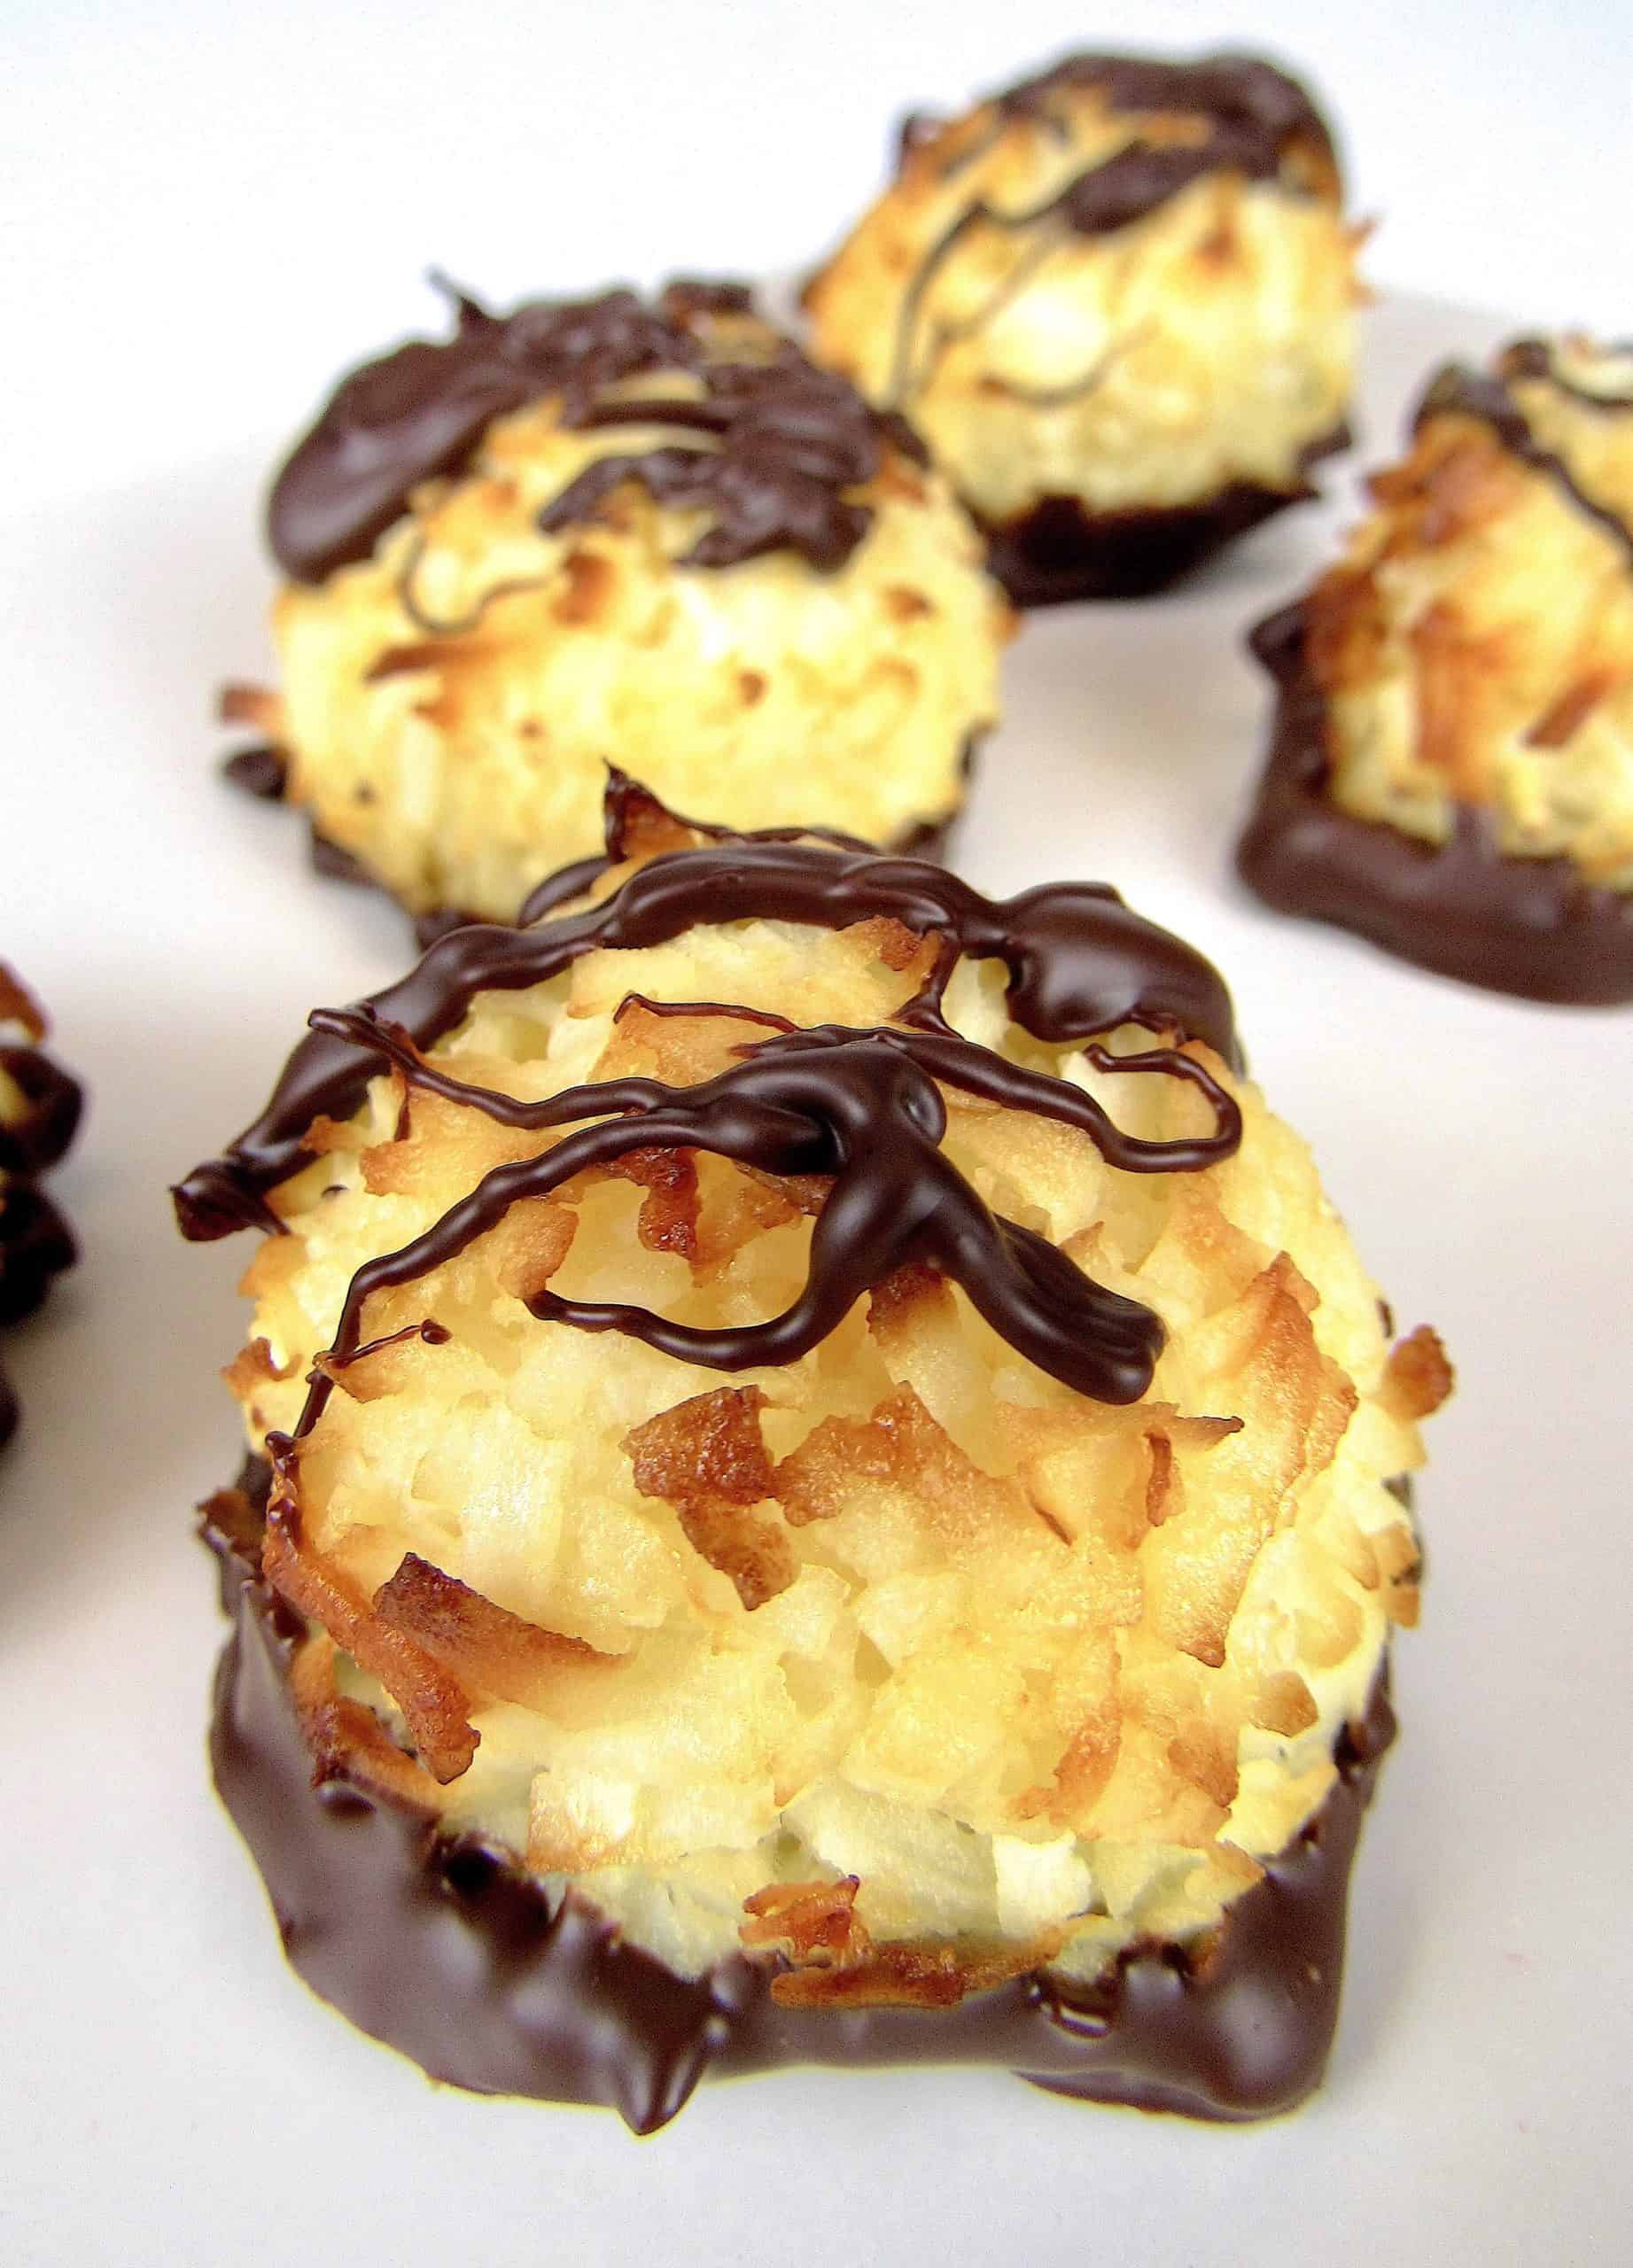 coconut macaroons with chocolate drizzled on top